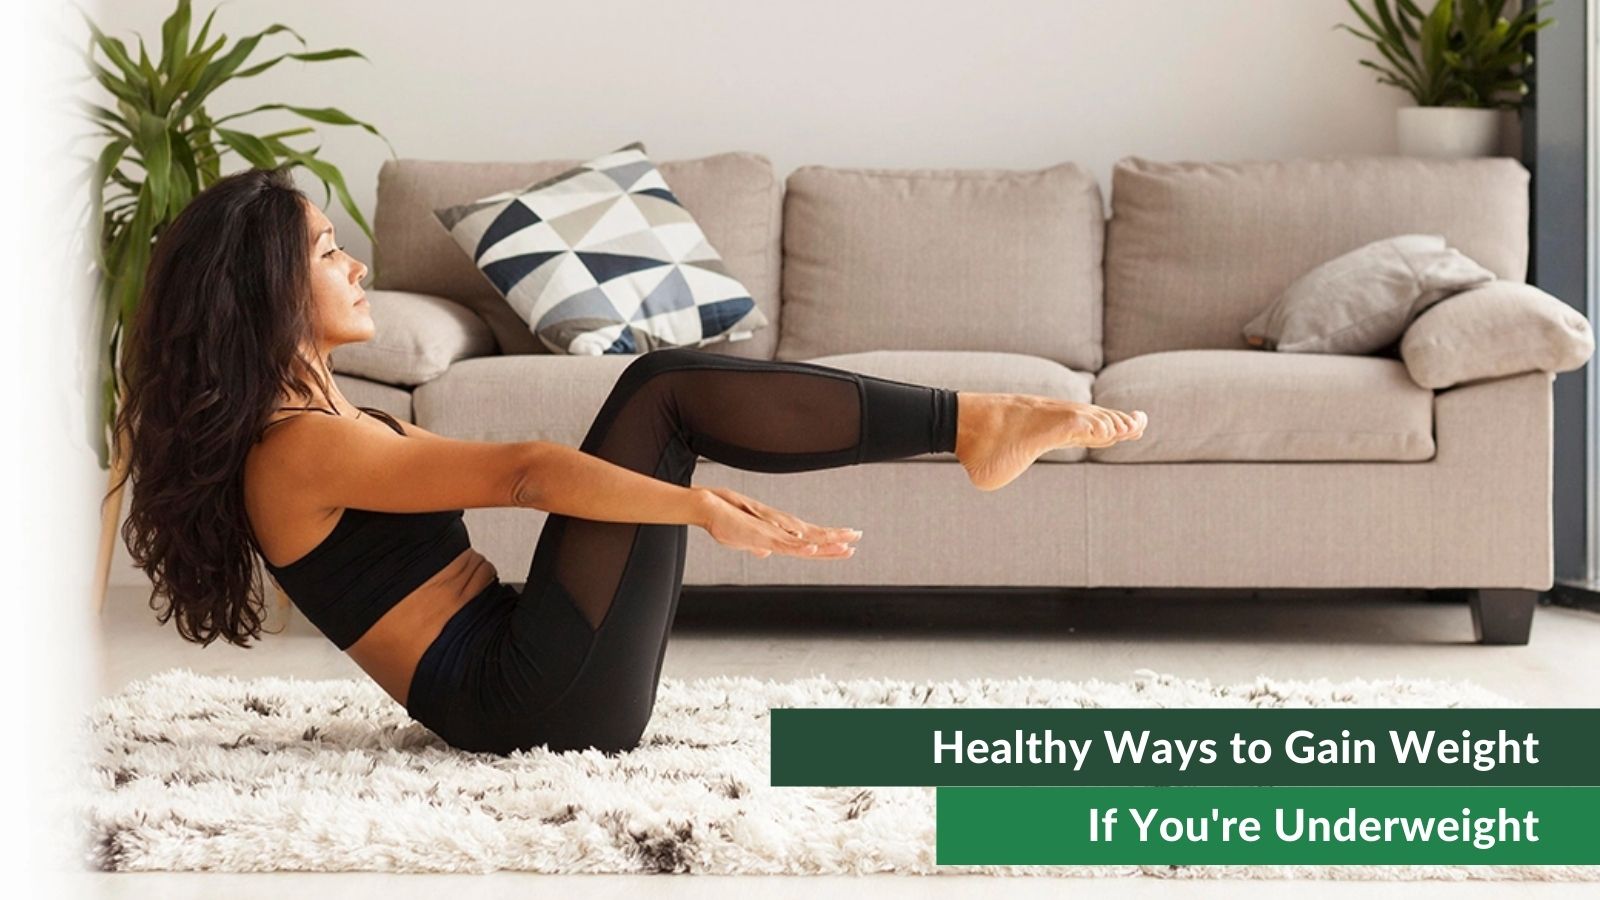 Healthy Ways to Gain Weight If You're Underweight